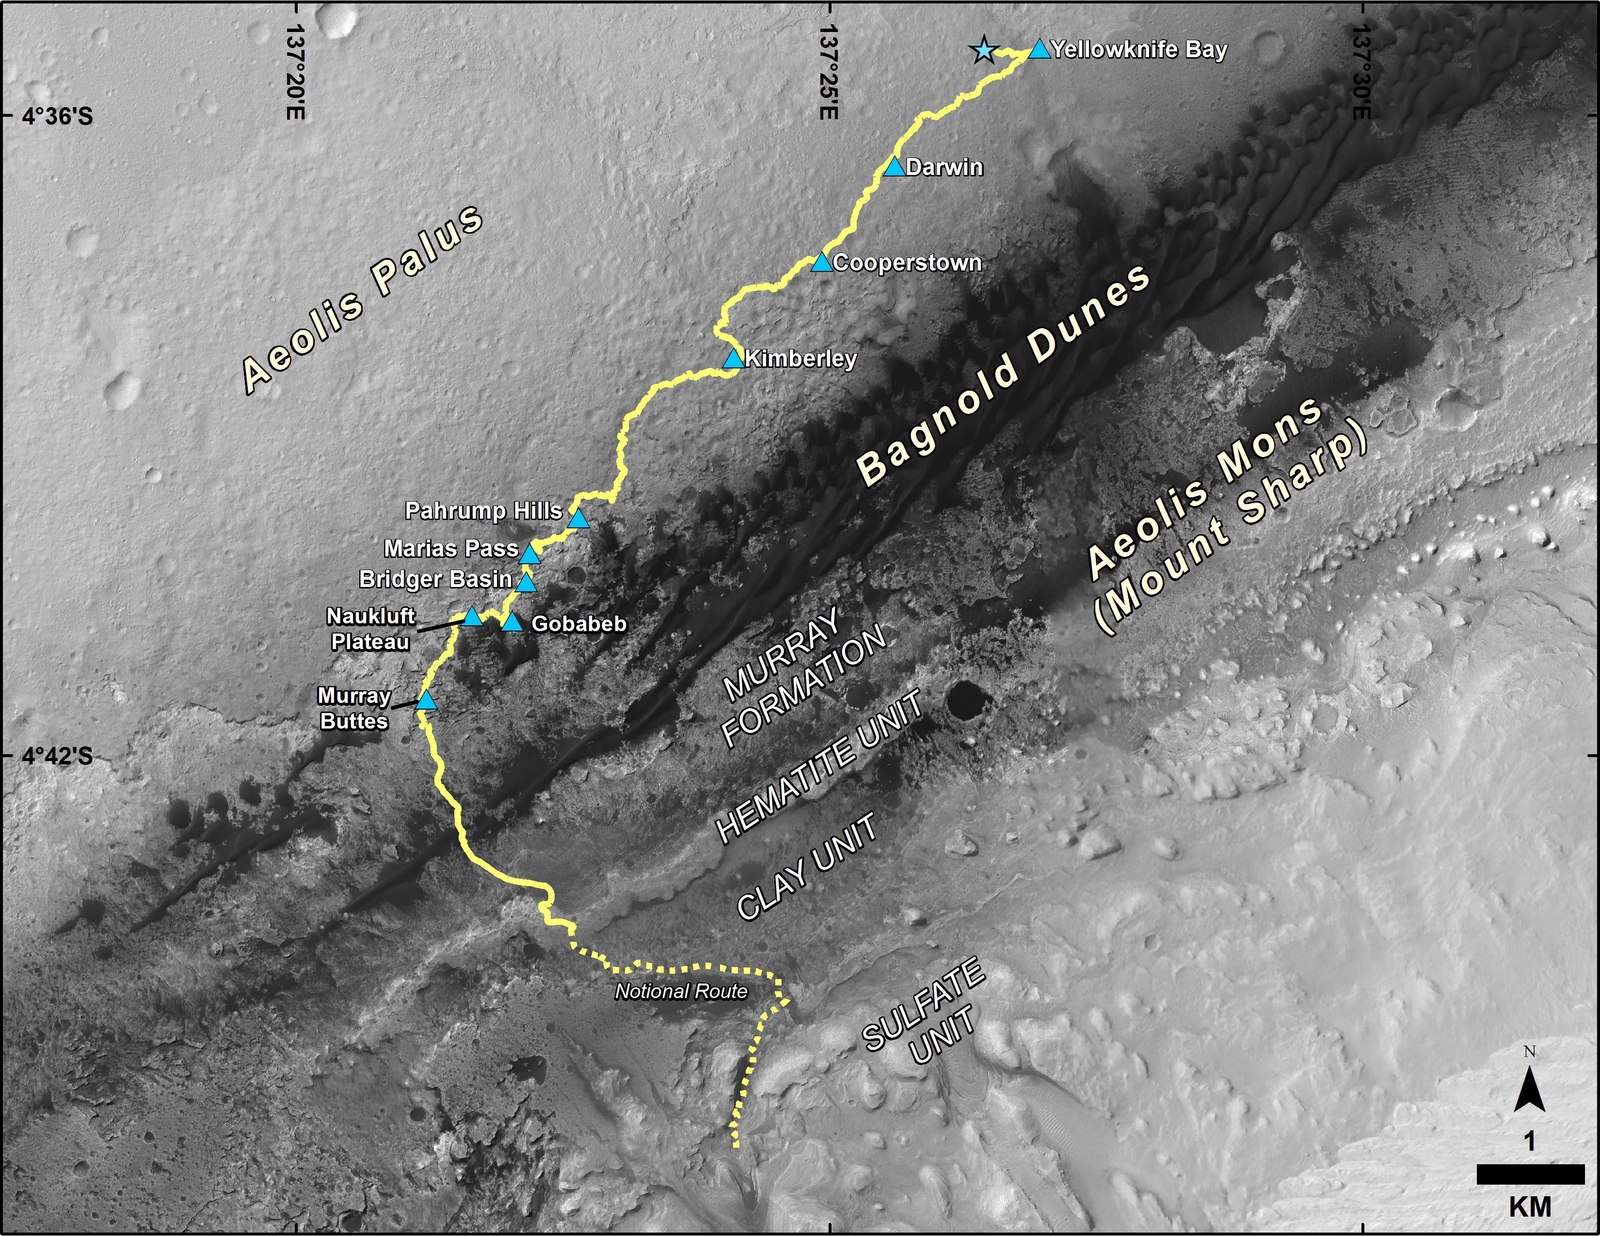 This map shows the route driven by NASA's Curiosity Mars rover from the location where it landed in August 2012 to its location in September 2016 at